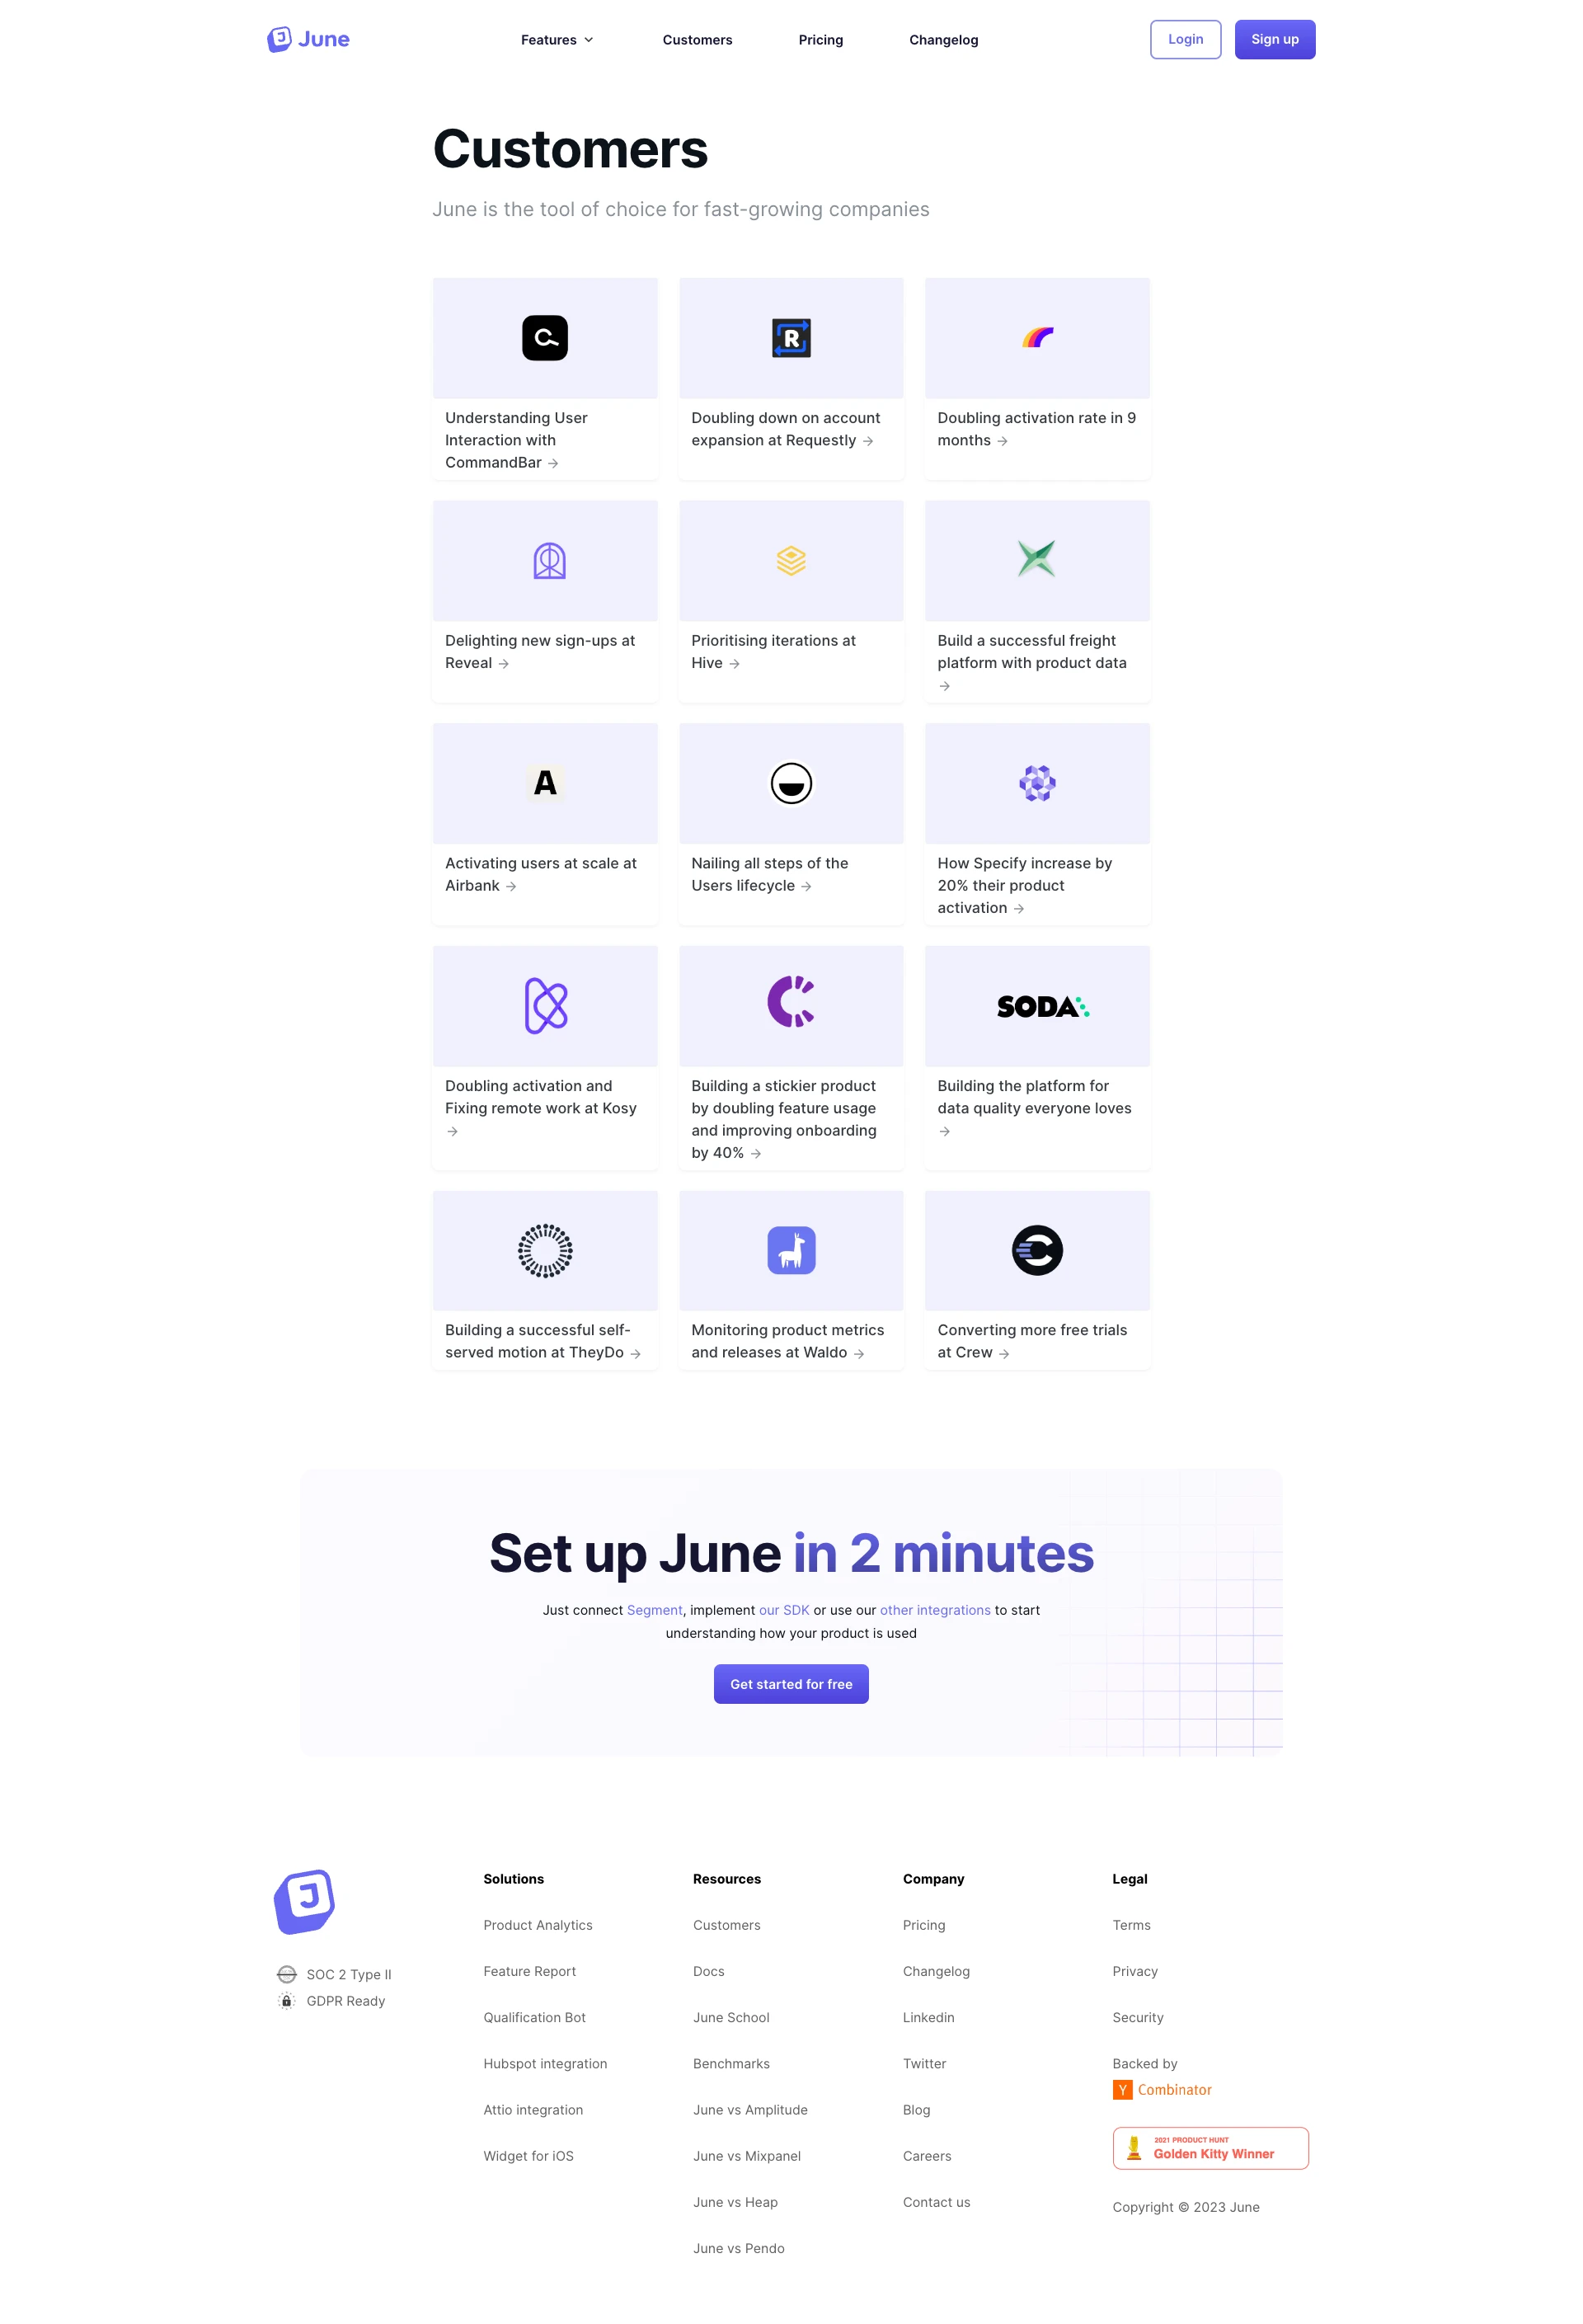 June Landing Page Example: A new way to do product analytics. June is the only product analytics tool that gives you auto-generated reports focused on companies.